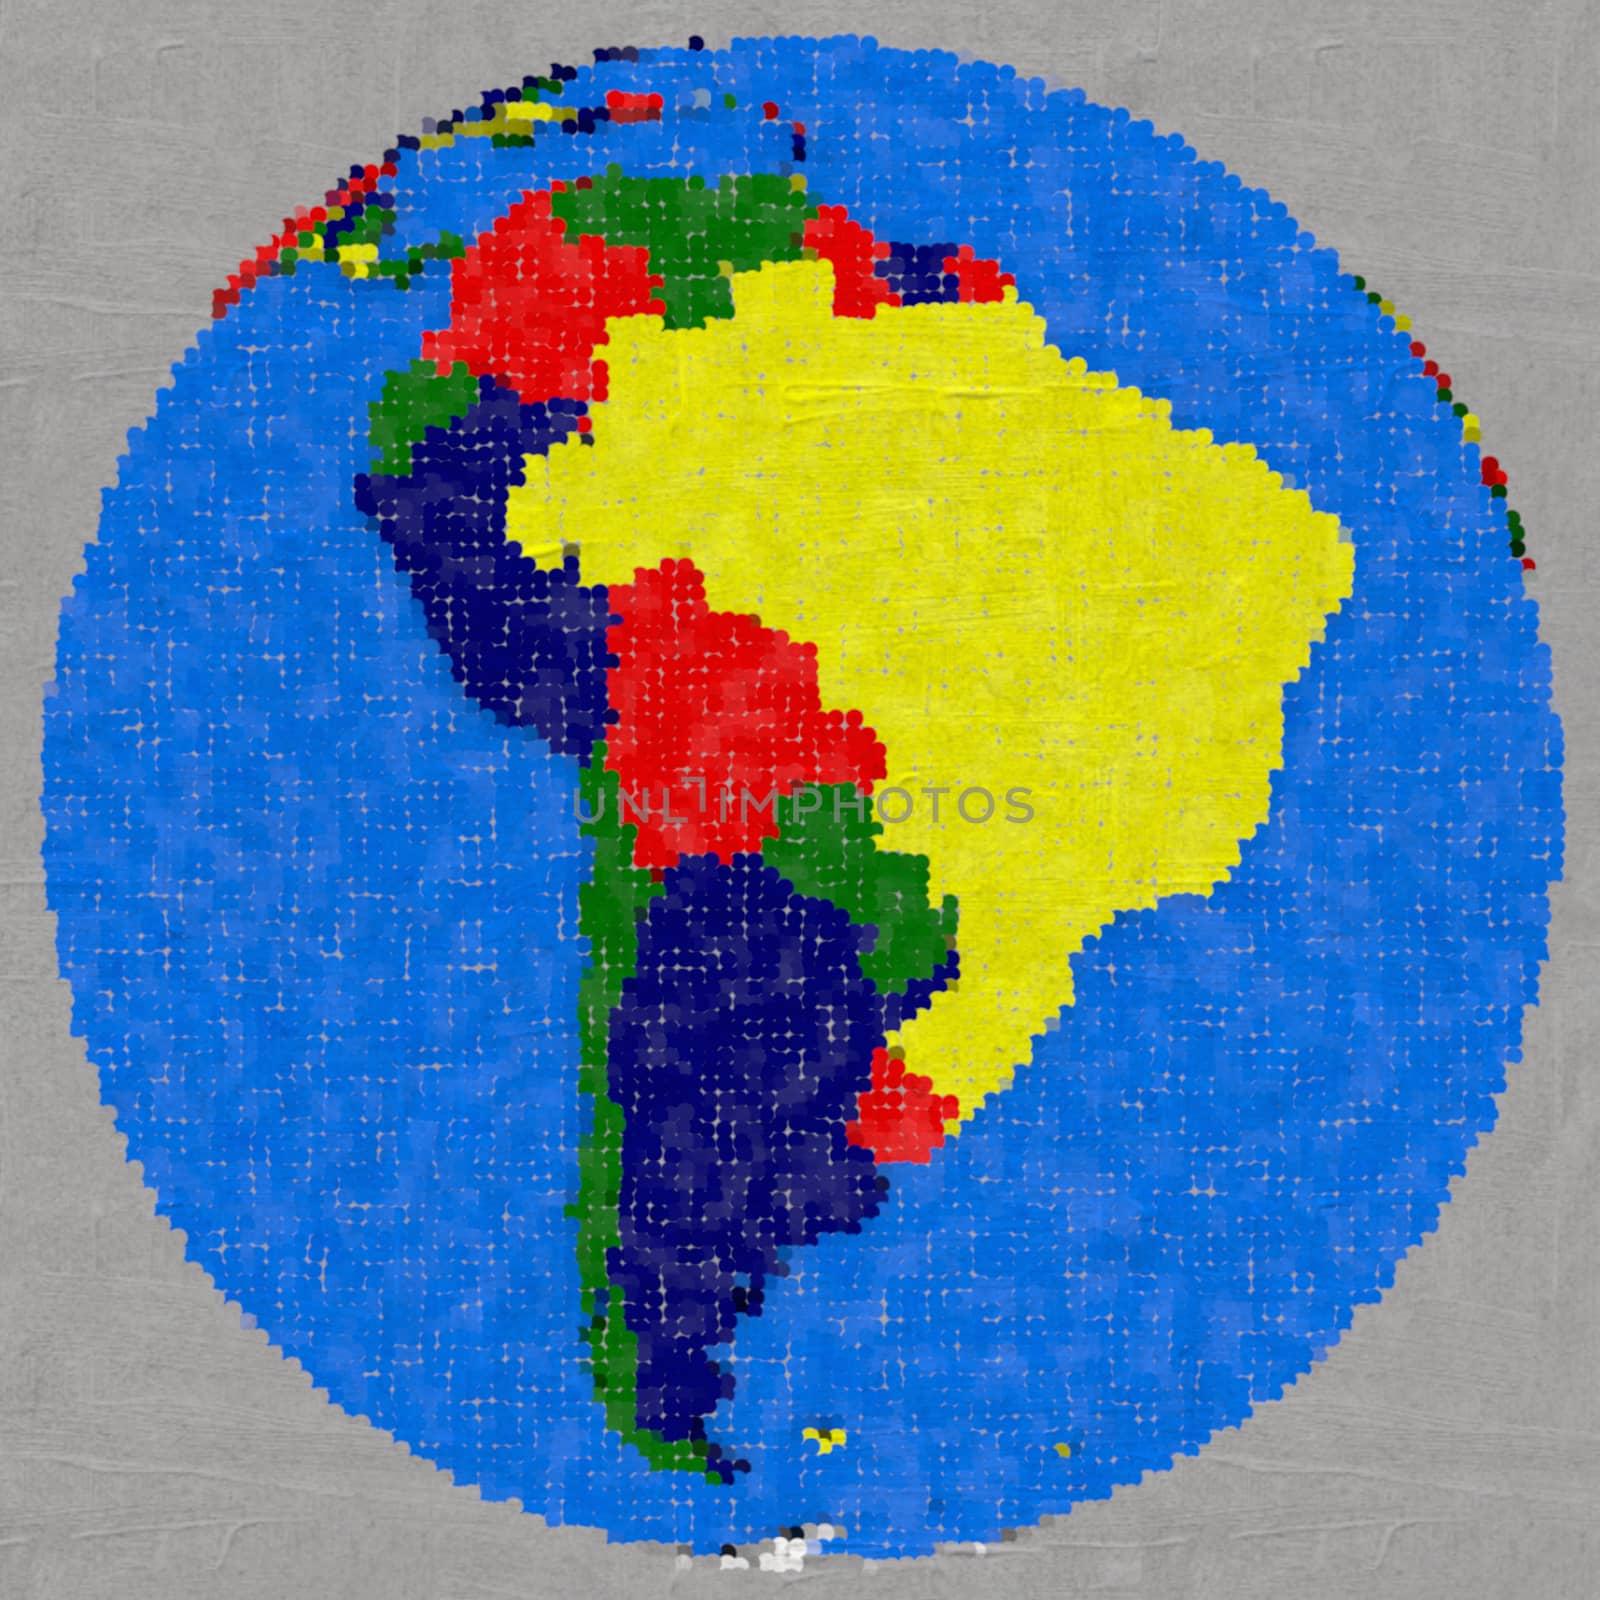 Drawing of south America on Earth by Harvepino